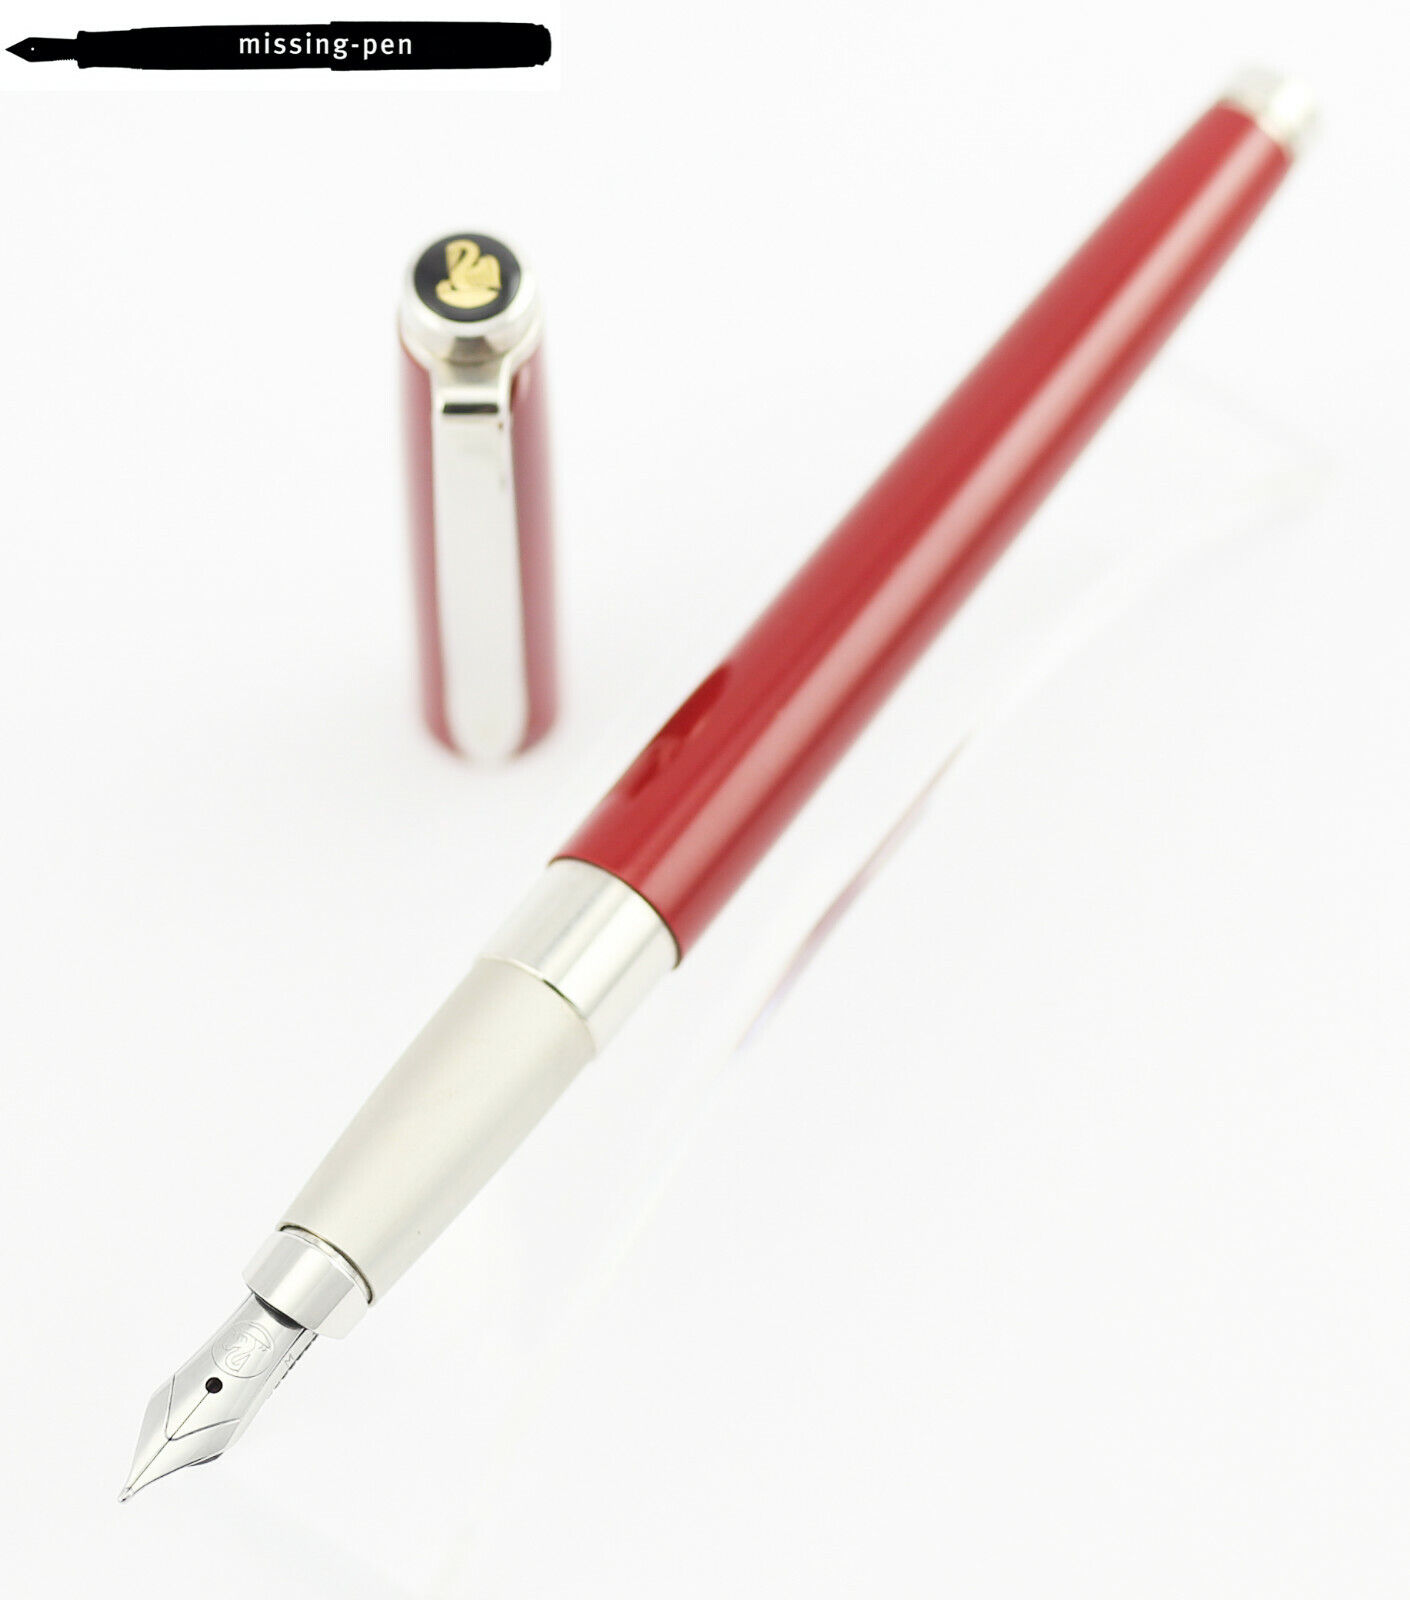 Pelikan Celebry P570 Fountain Pen Coral Red Korallenrot with F, M, B or OB-nib